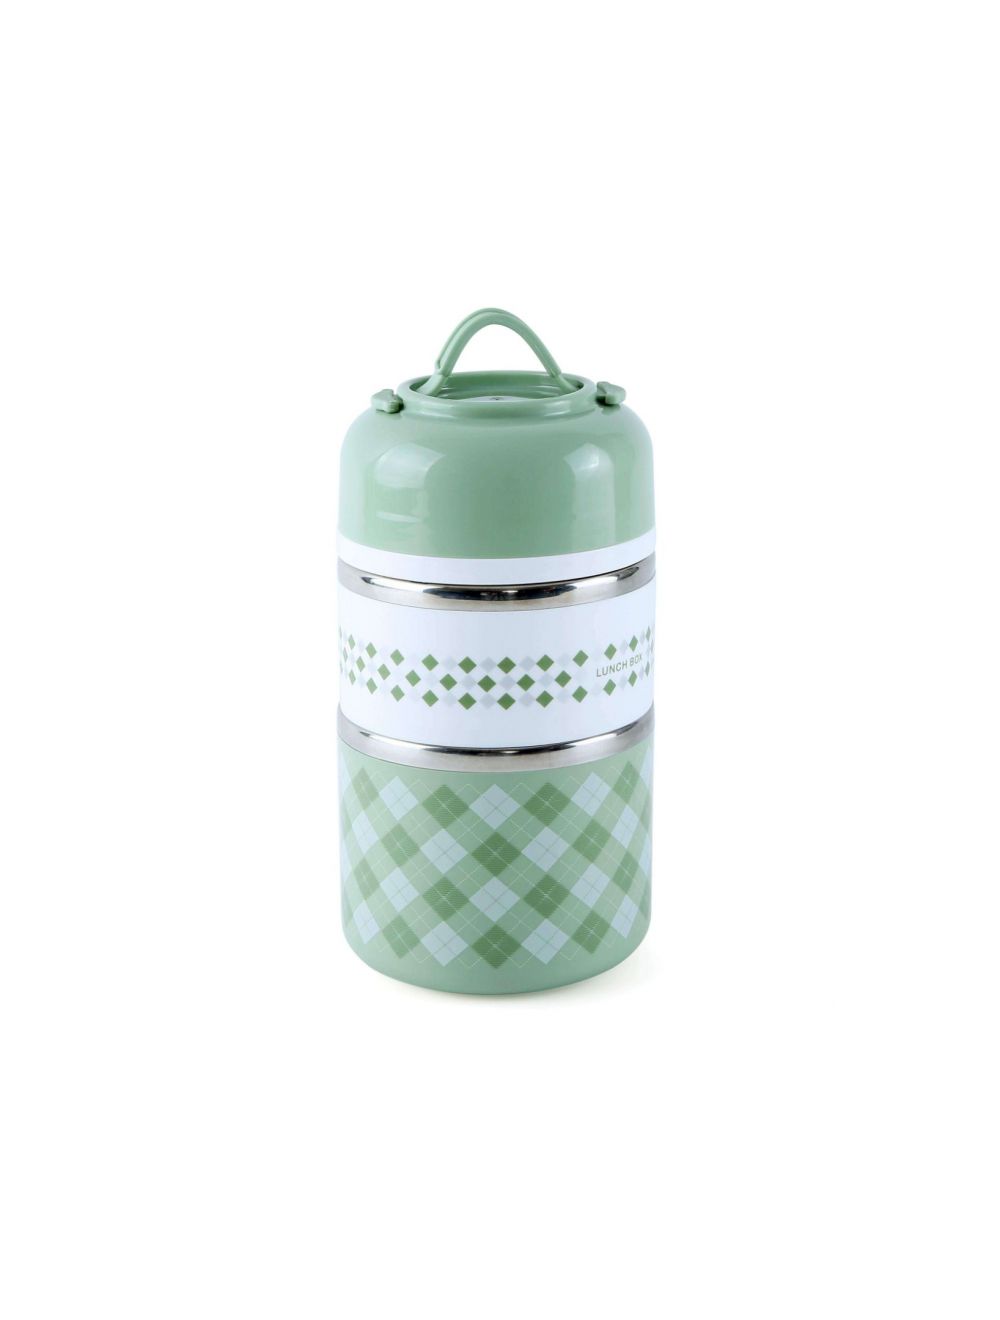 Royalford 930 ml Single Layer Round Lunch Box